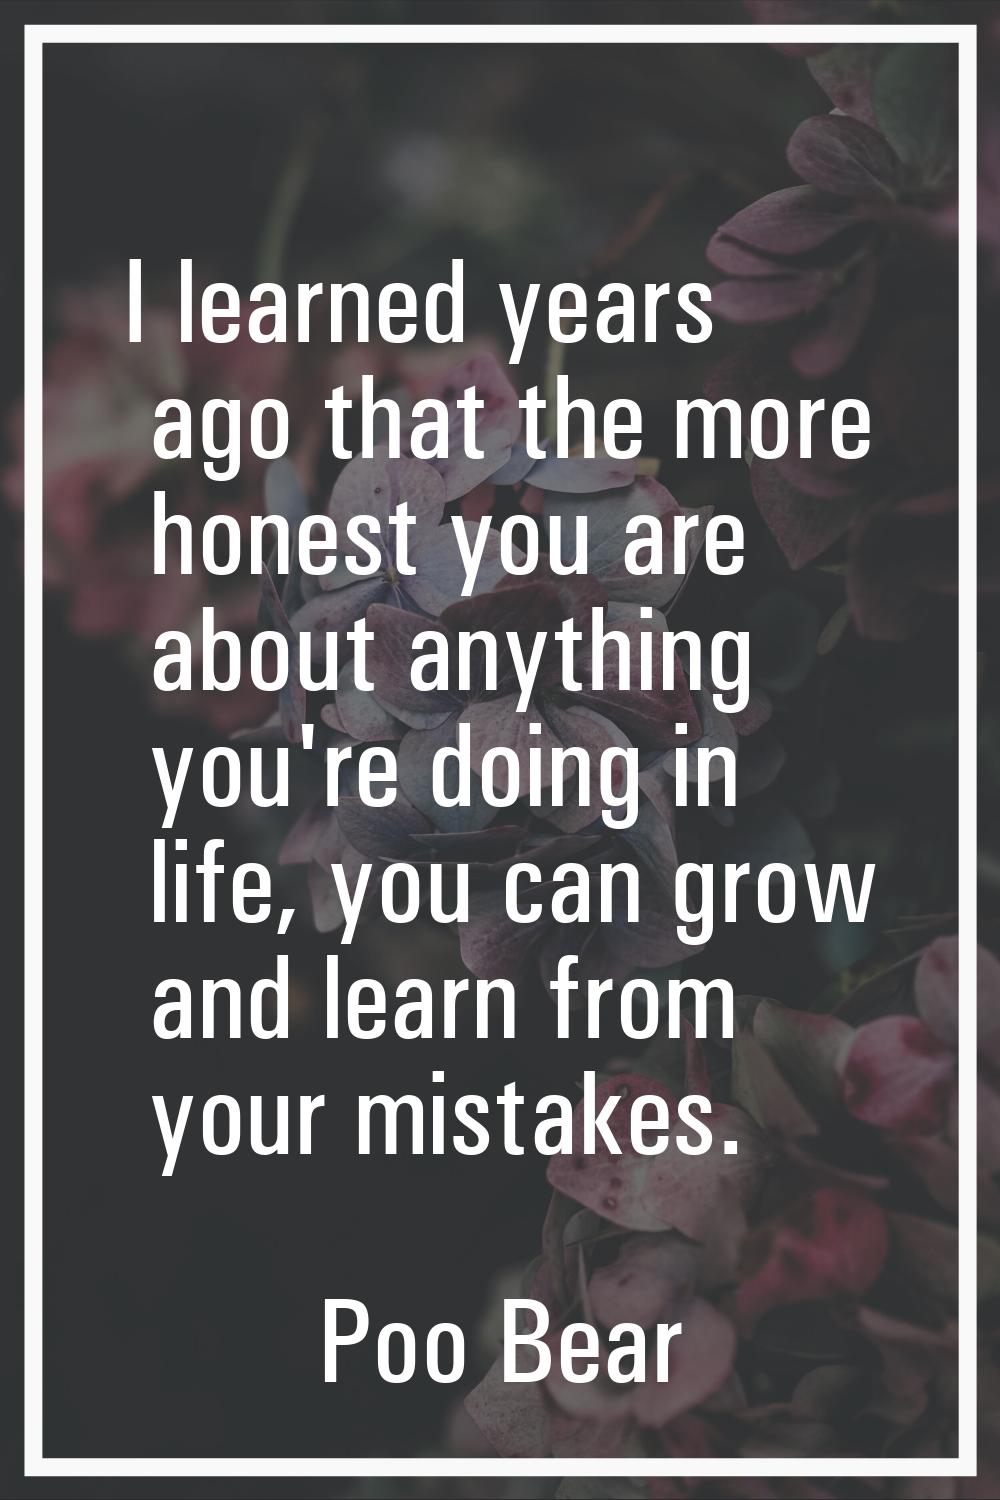 I learned years ago that the more honest you are about anything you're doing in life, you can grow 